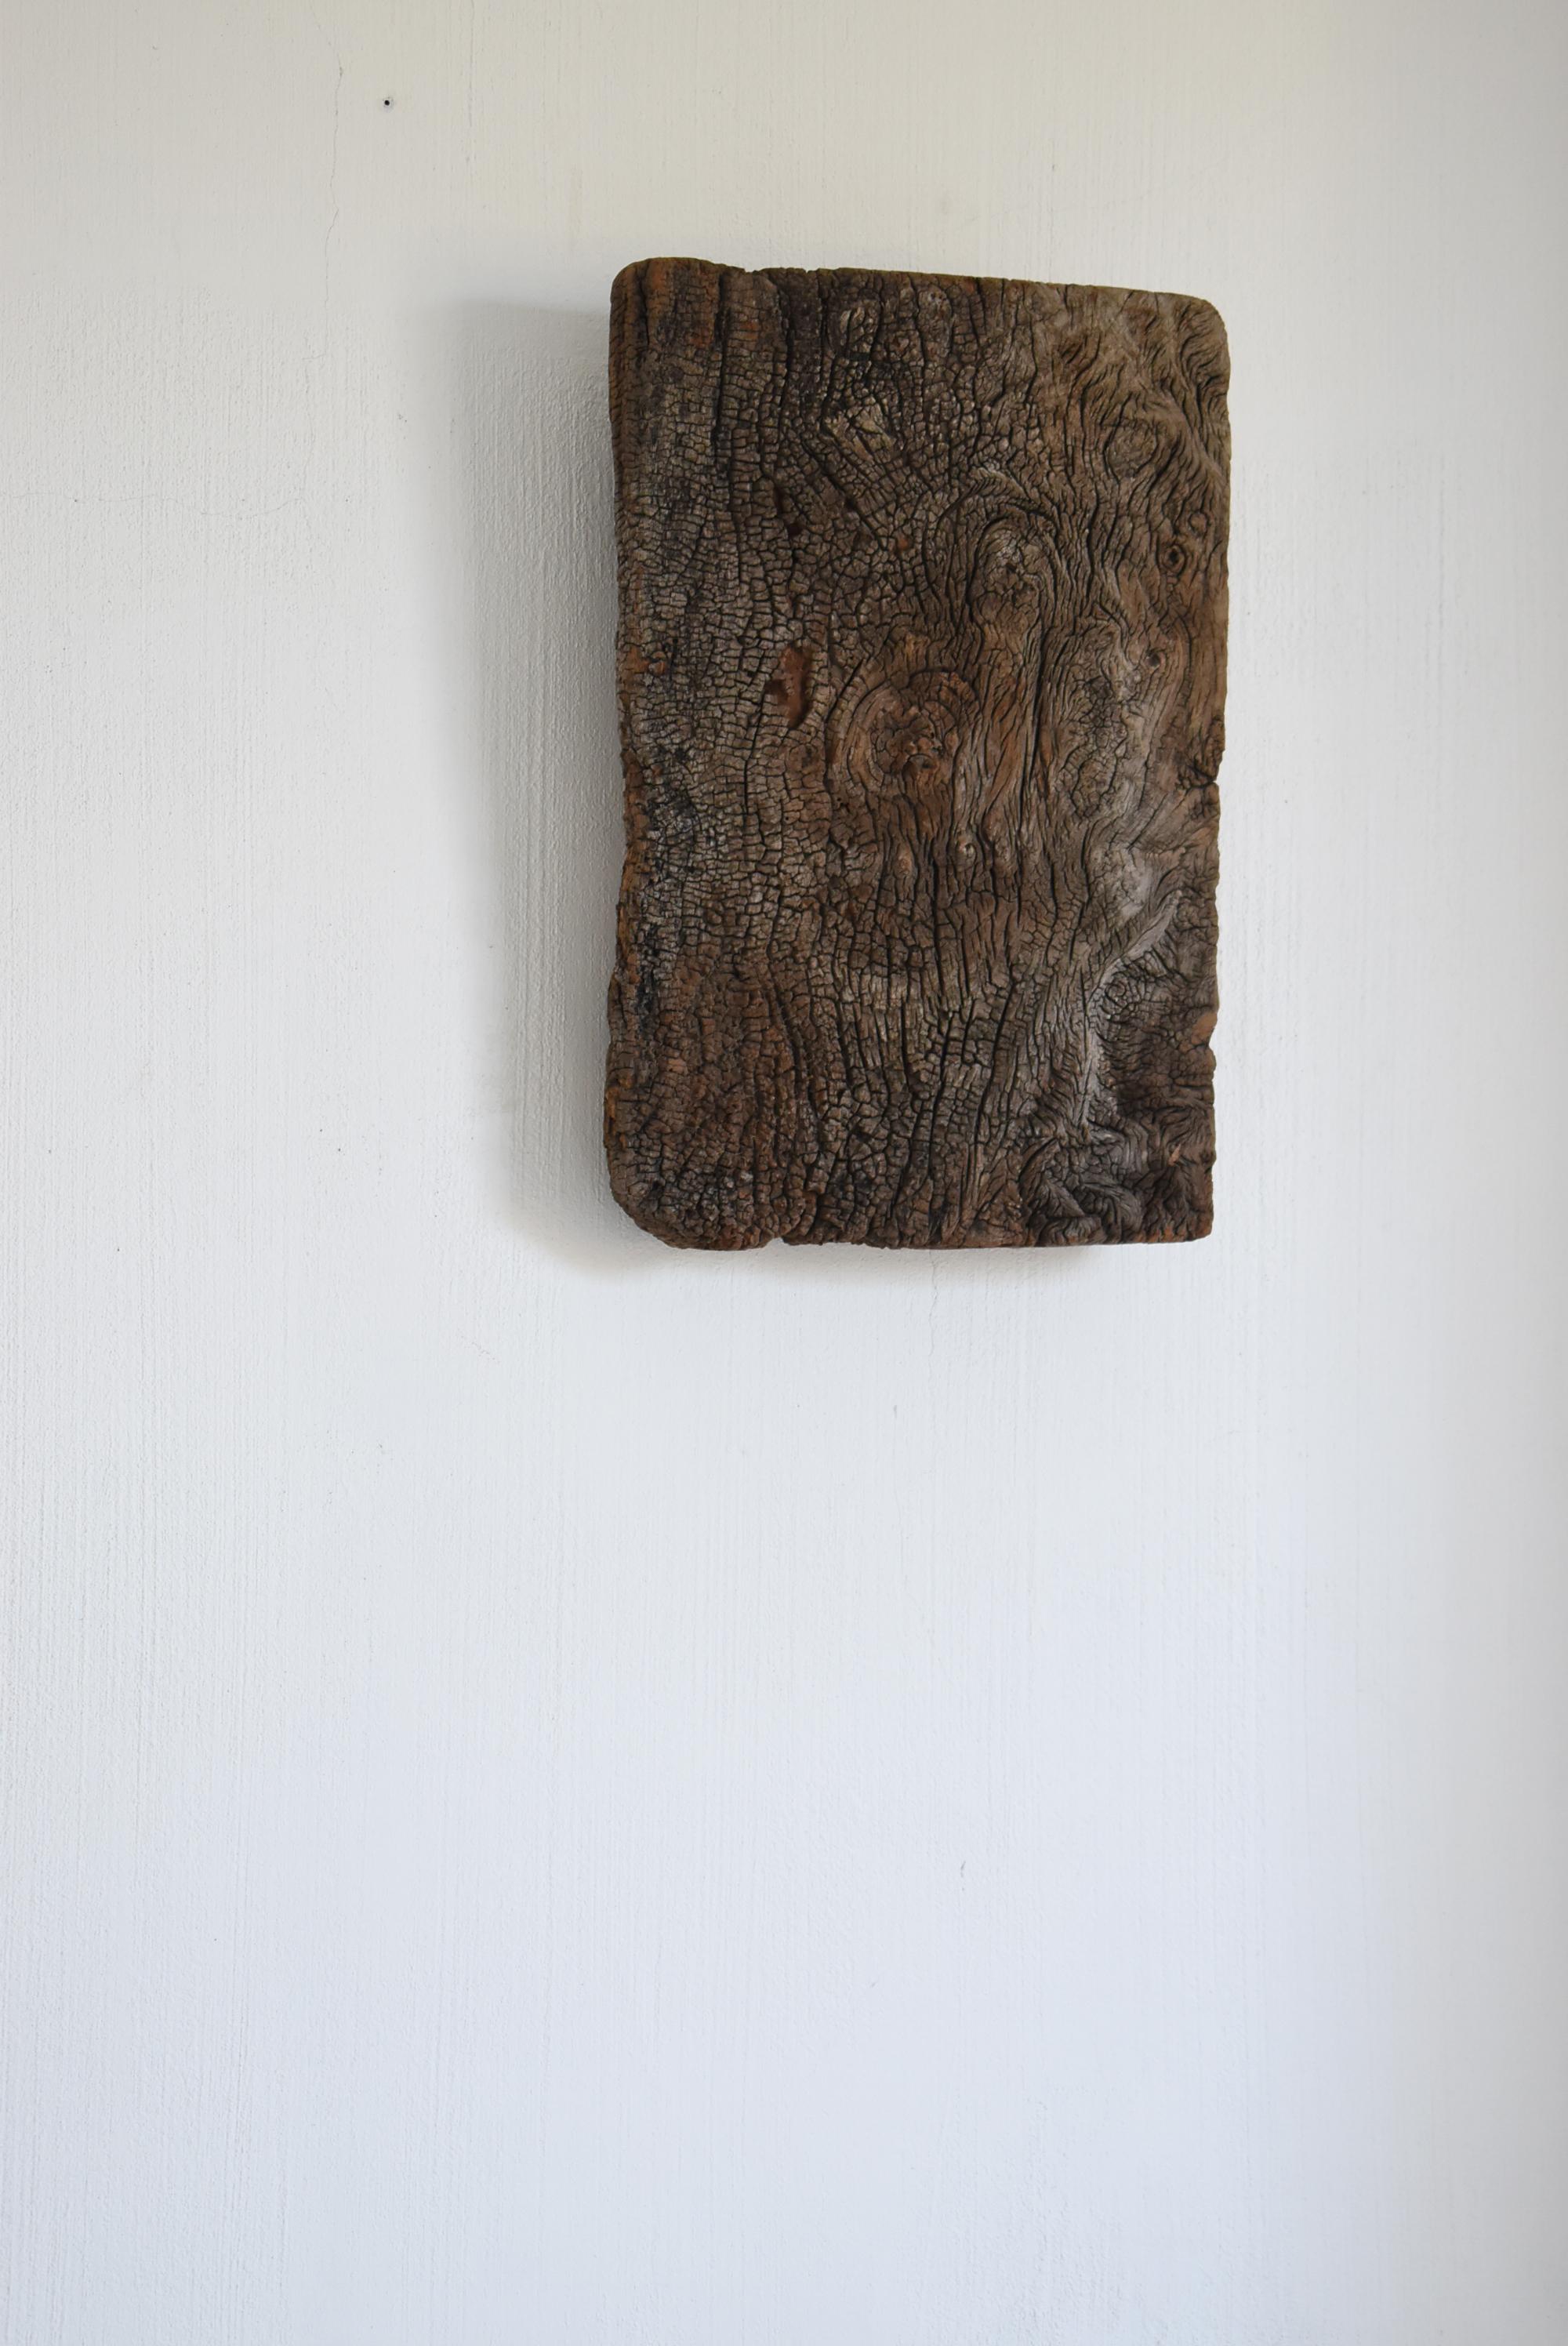 It is an old Japanese wooden board.
The era is unknown, but it is quite old.

The decaying figure is very beautiful.
We recommend decorating it on the wall.

Weight 13 kg

Due to the nature of the item, pieces of wood may spill.